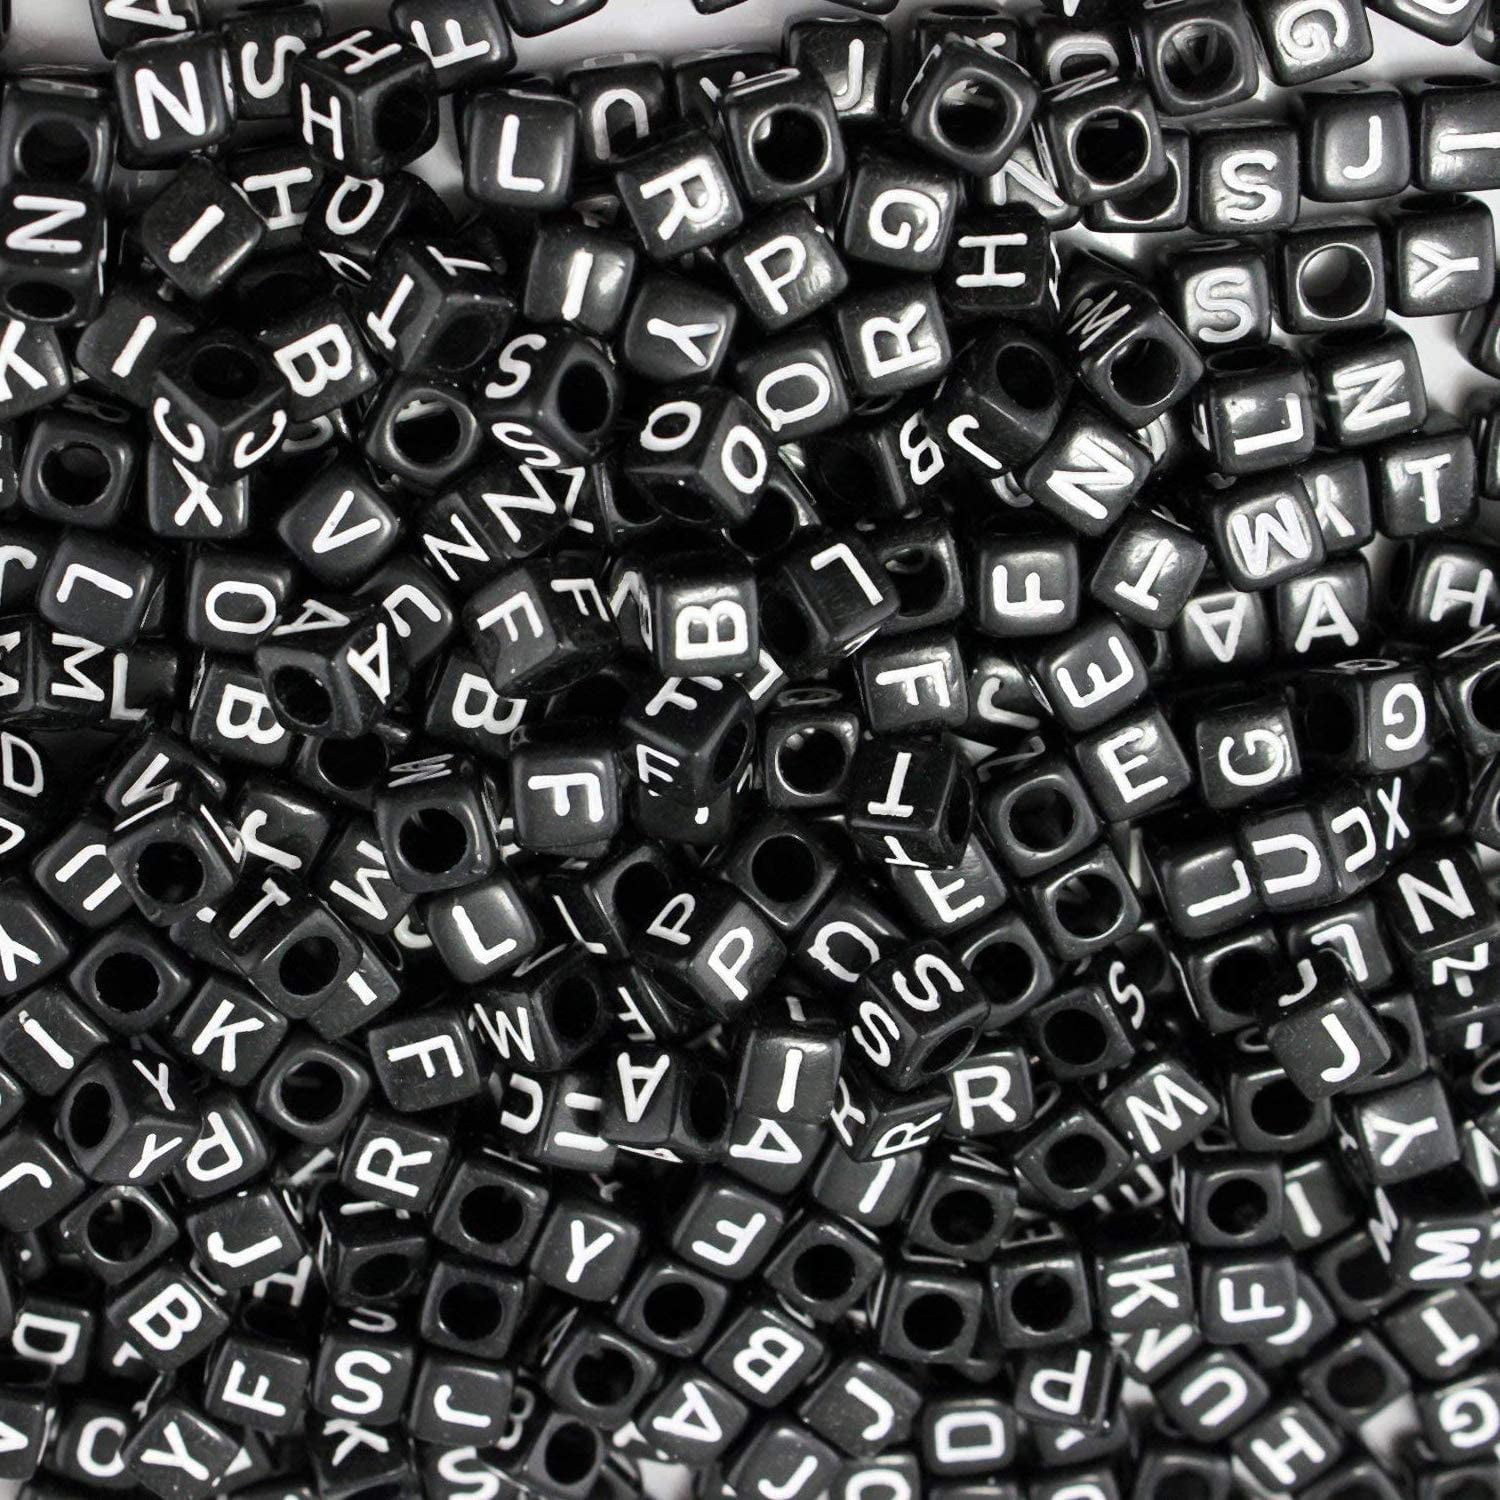 Trimming Shop Square Acrylic Black Letter Beads with White Alphabet A to Z  Box Set - 1300pcs 